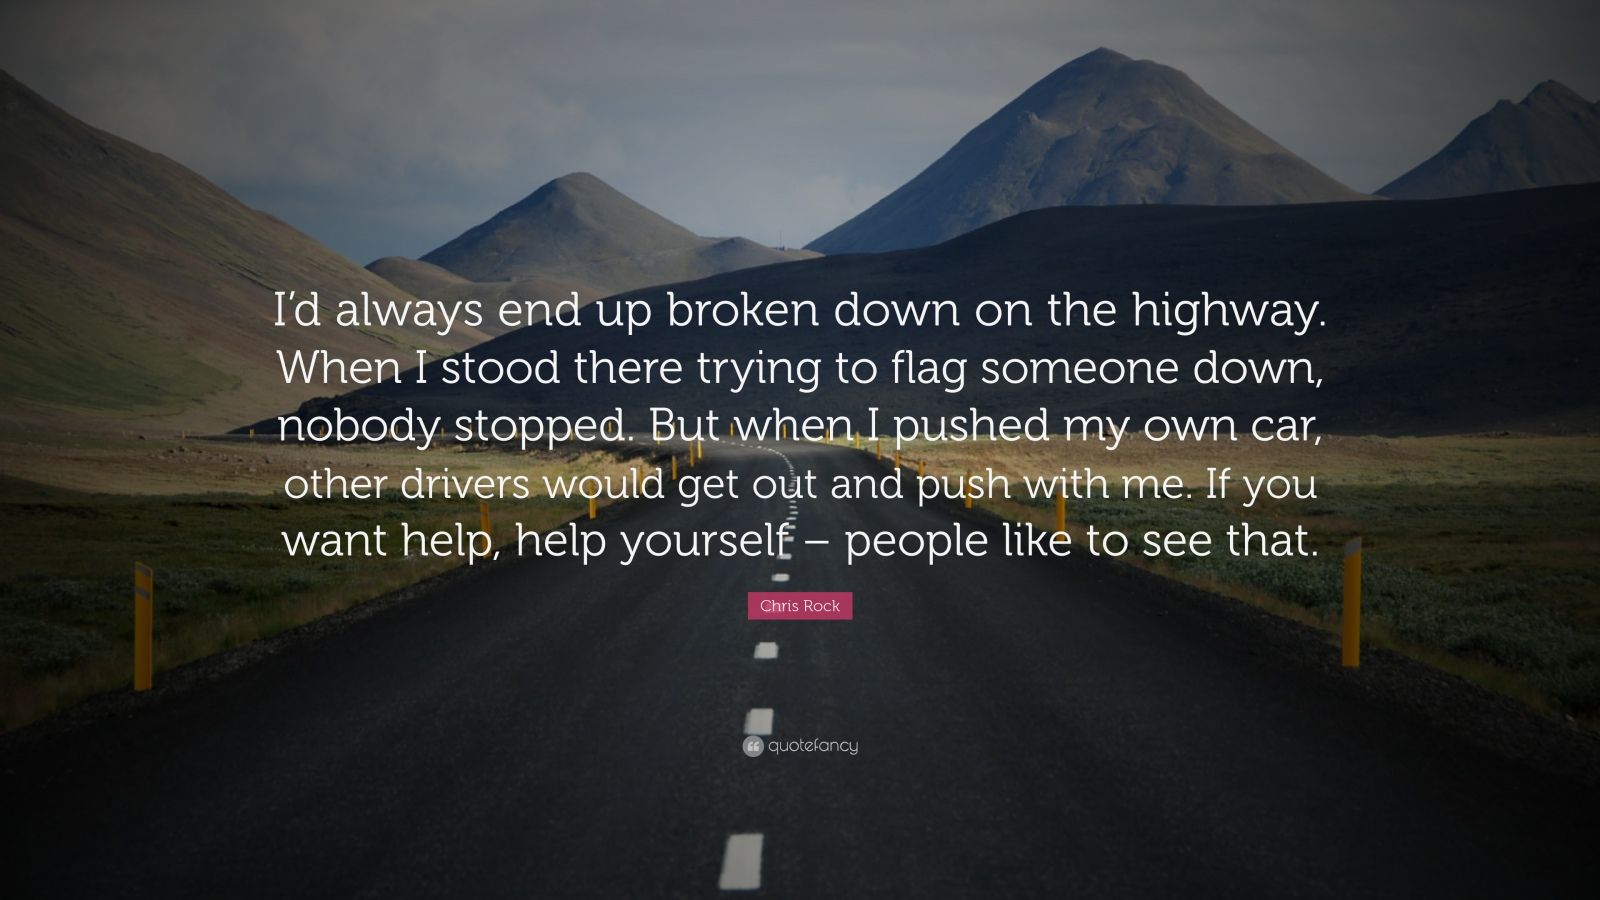 Chris Rock Quote: “I’d always end up broken down on the highway. When I